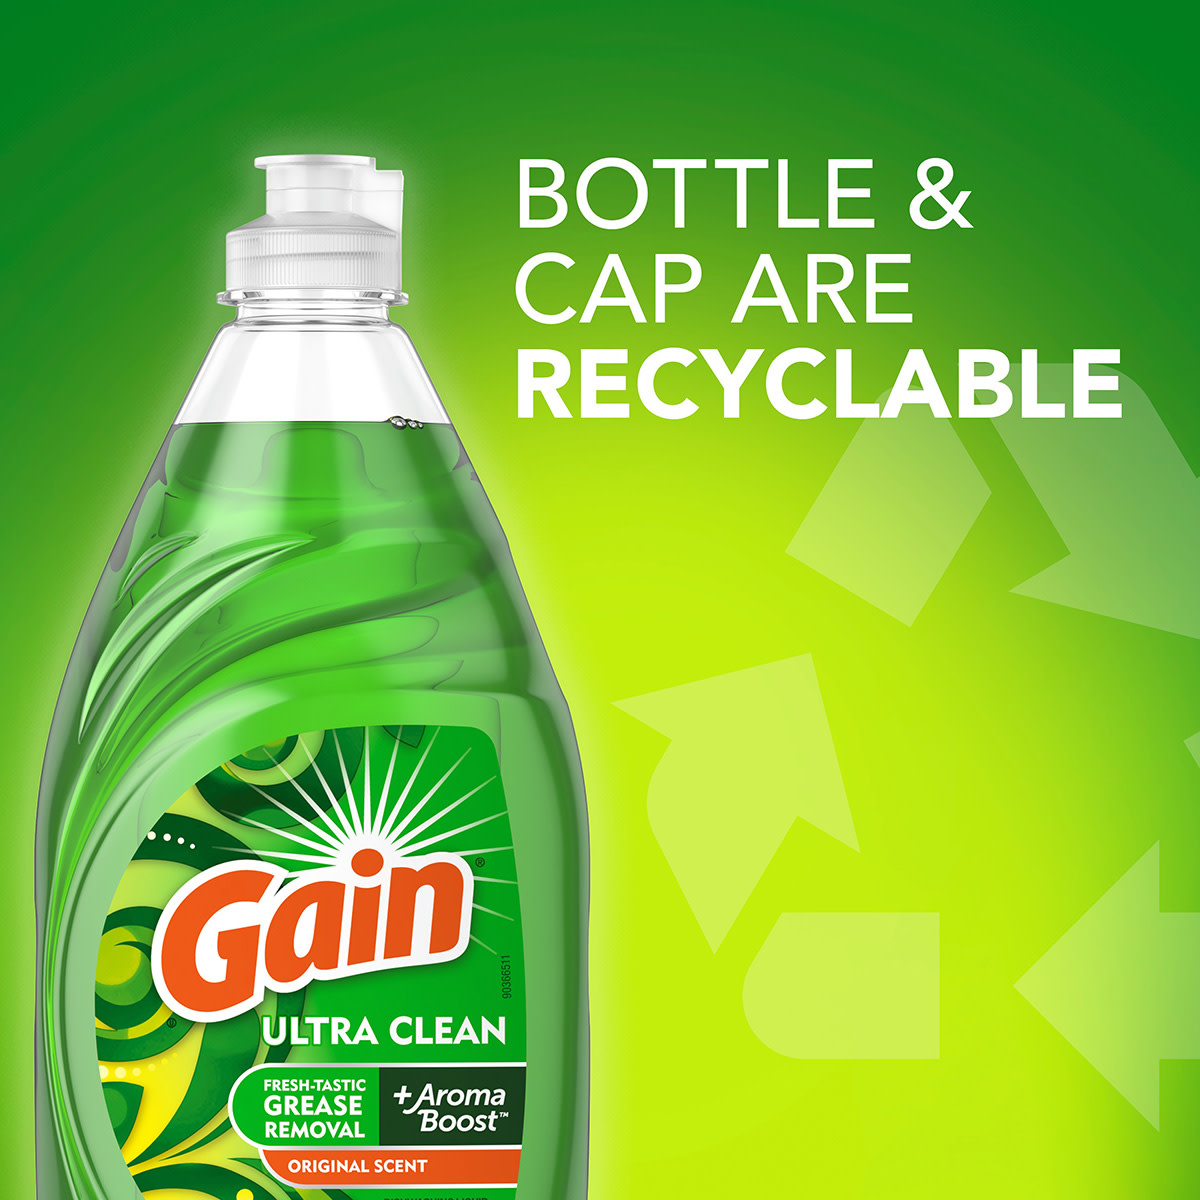 Gain Ultra Dishwashing Liquid Dish Soap Bottle and Cap are Recyclable